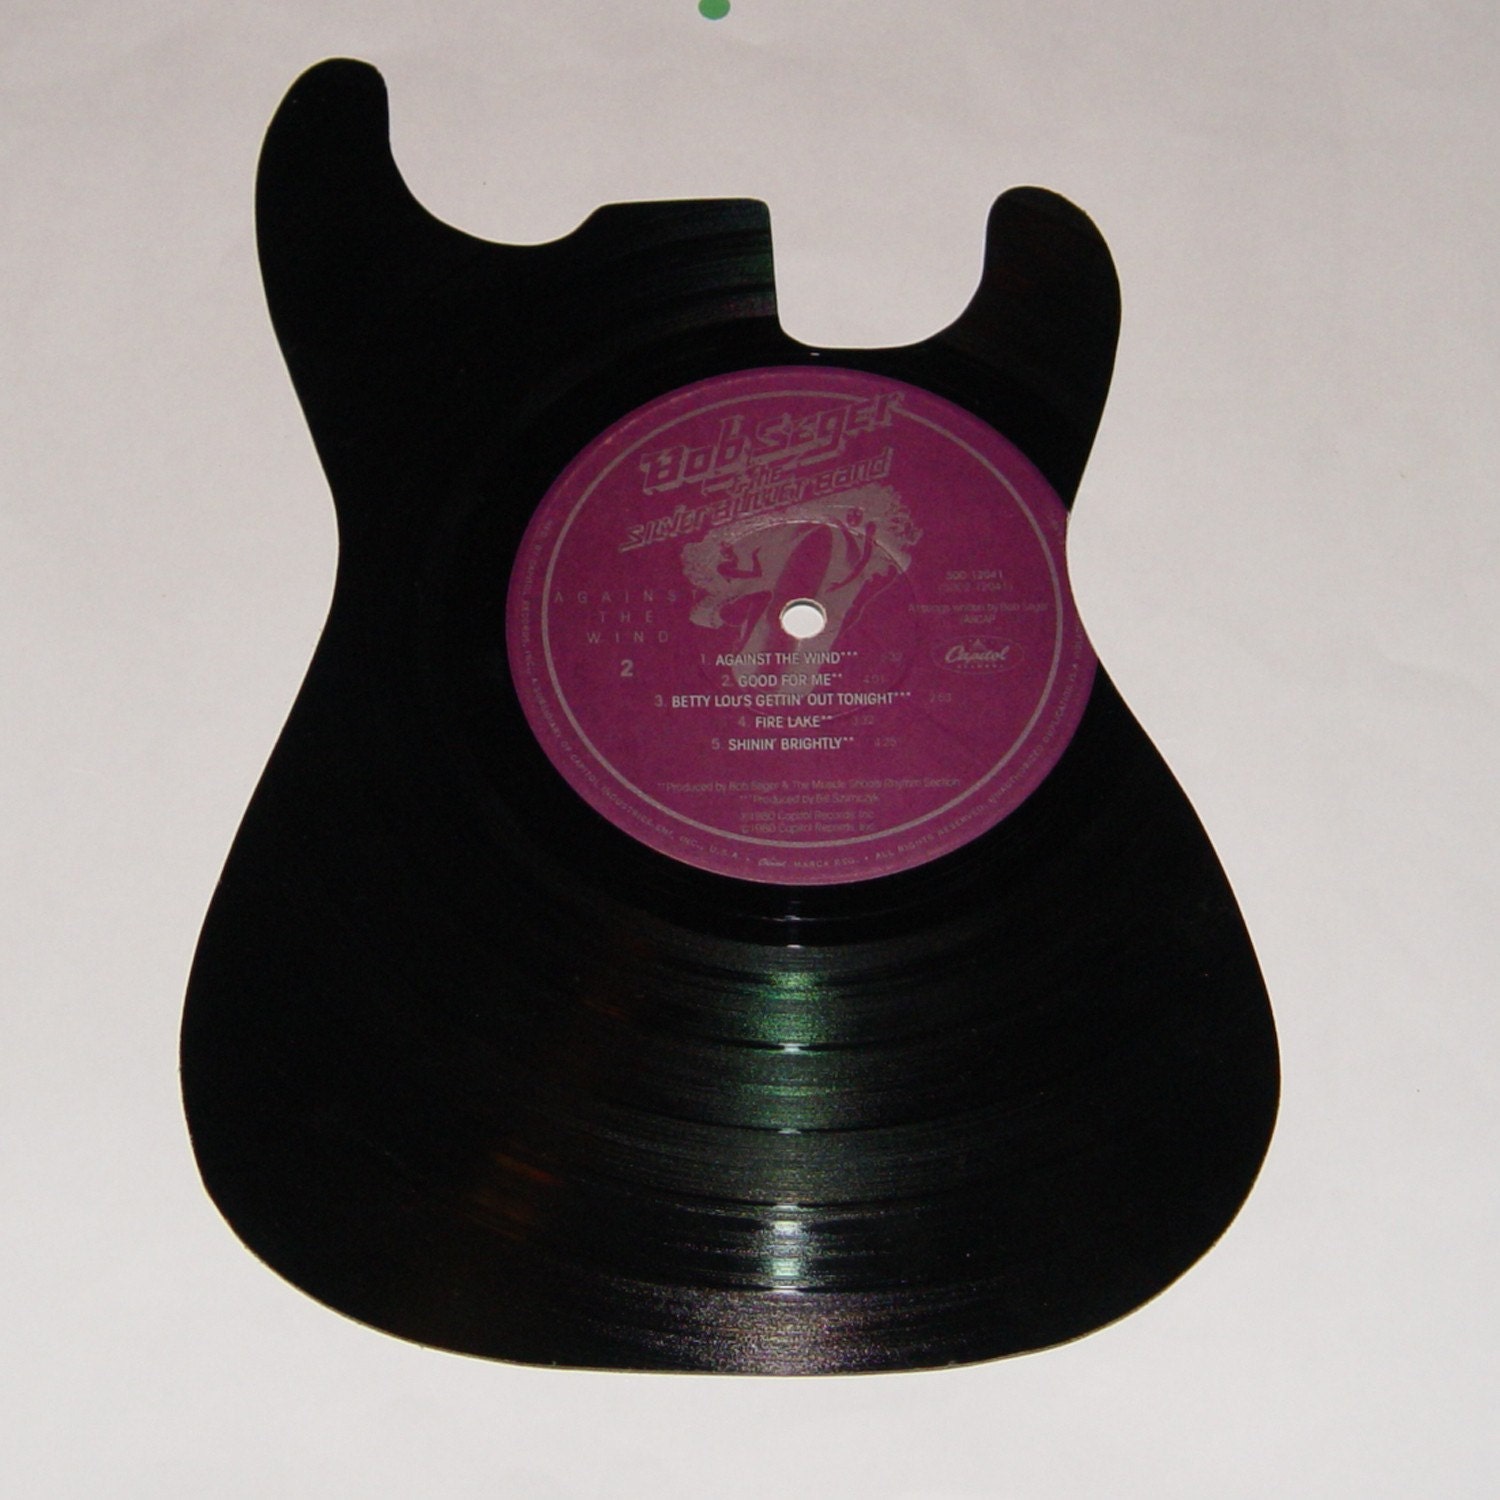 Vinyl Record Silhouette Guitar Bob Seger and the Silver Bullet Band